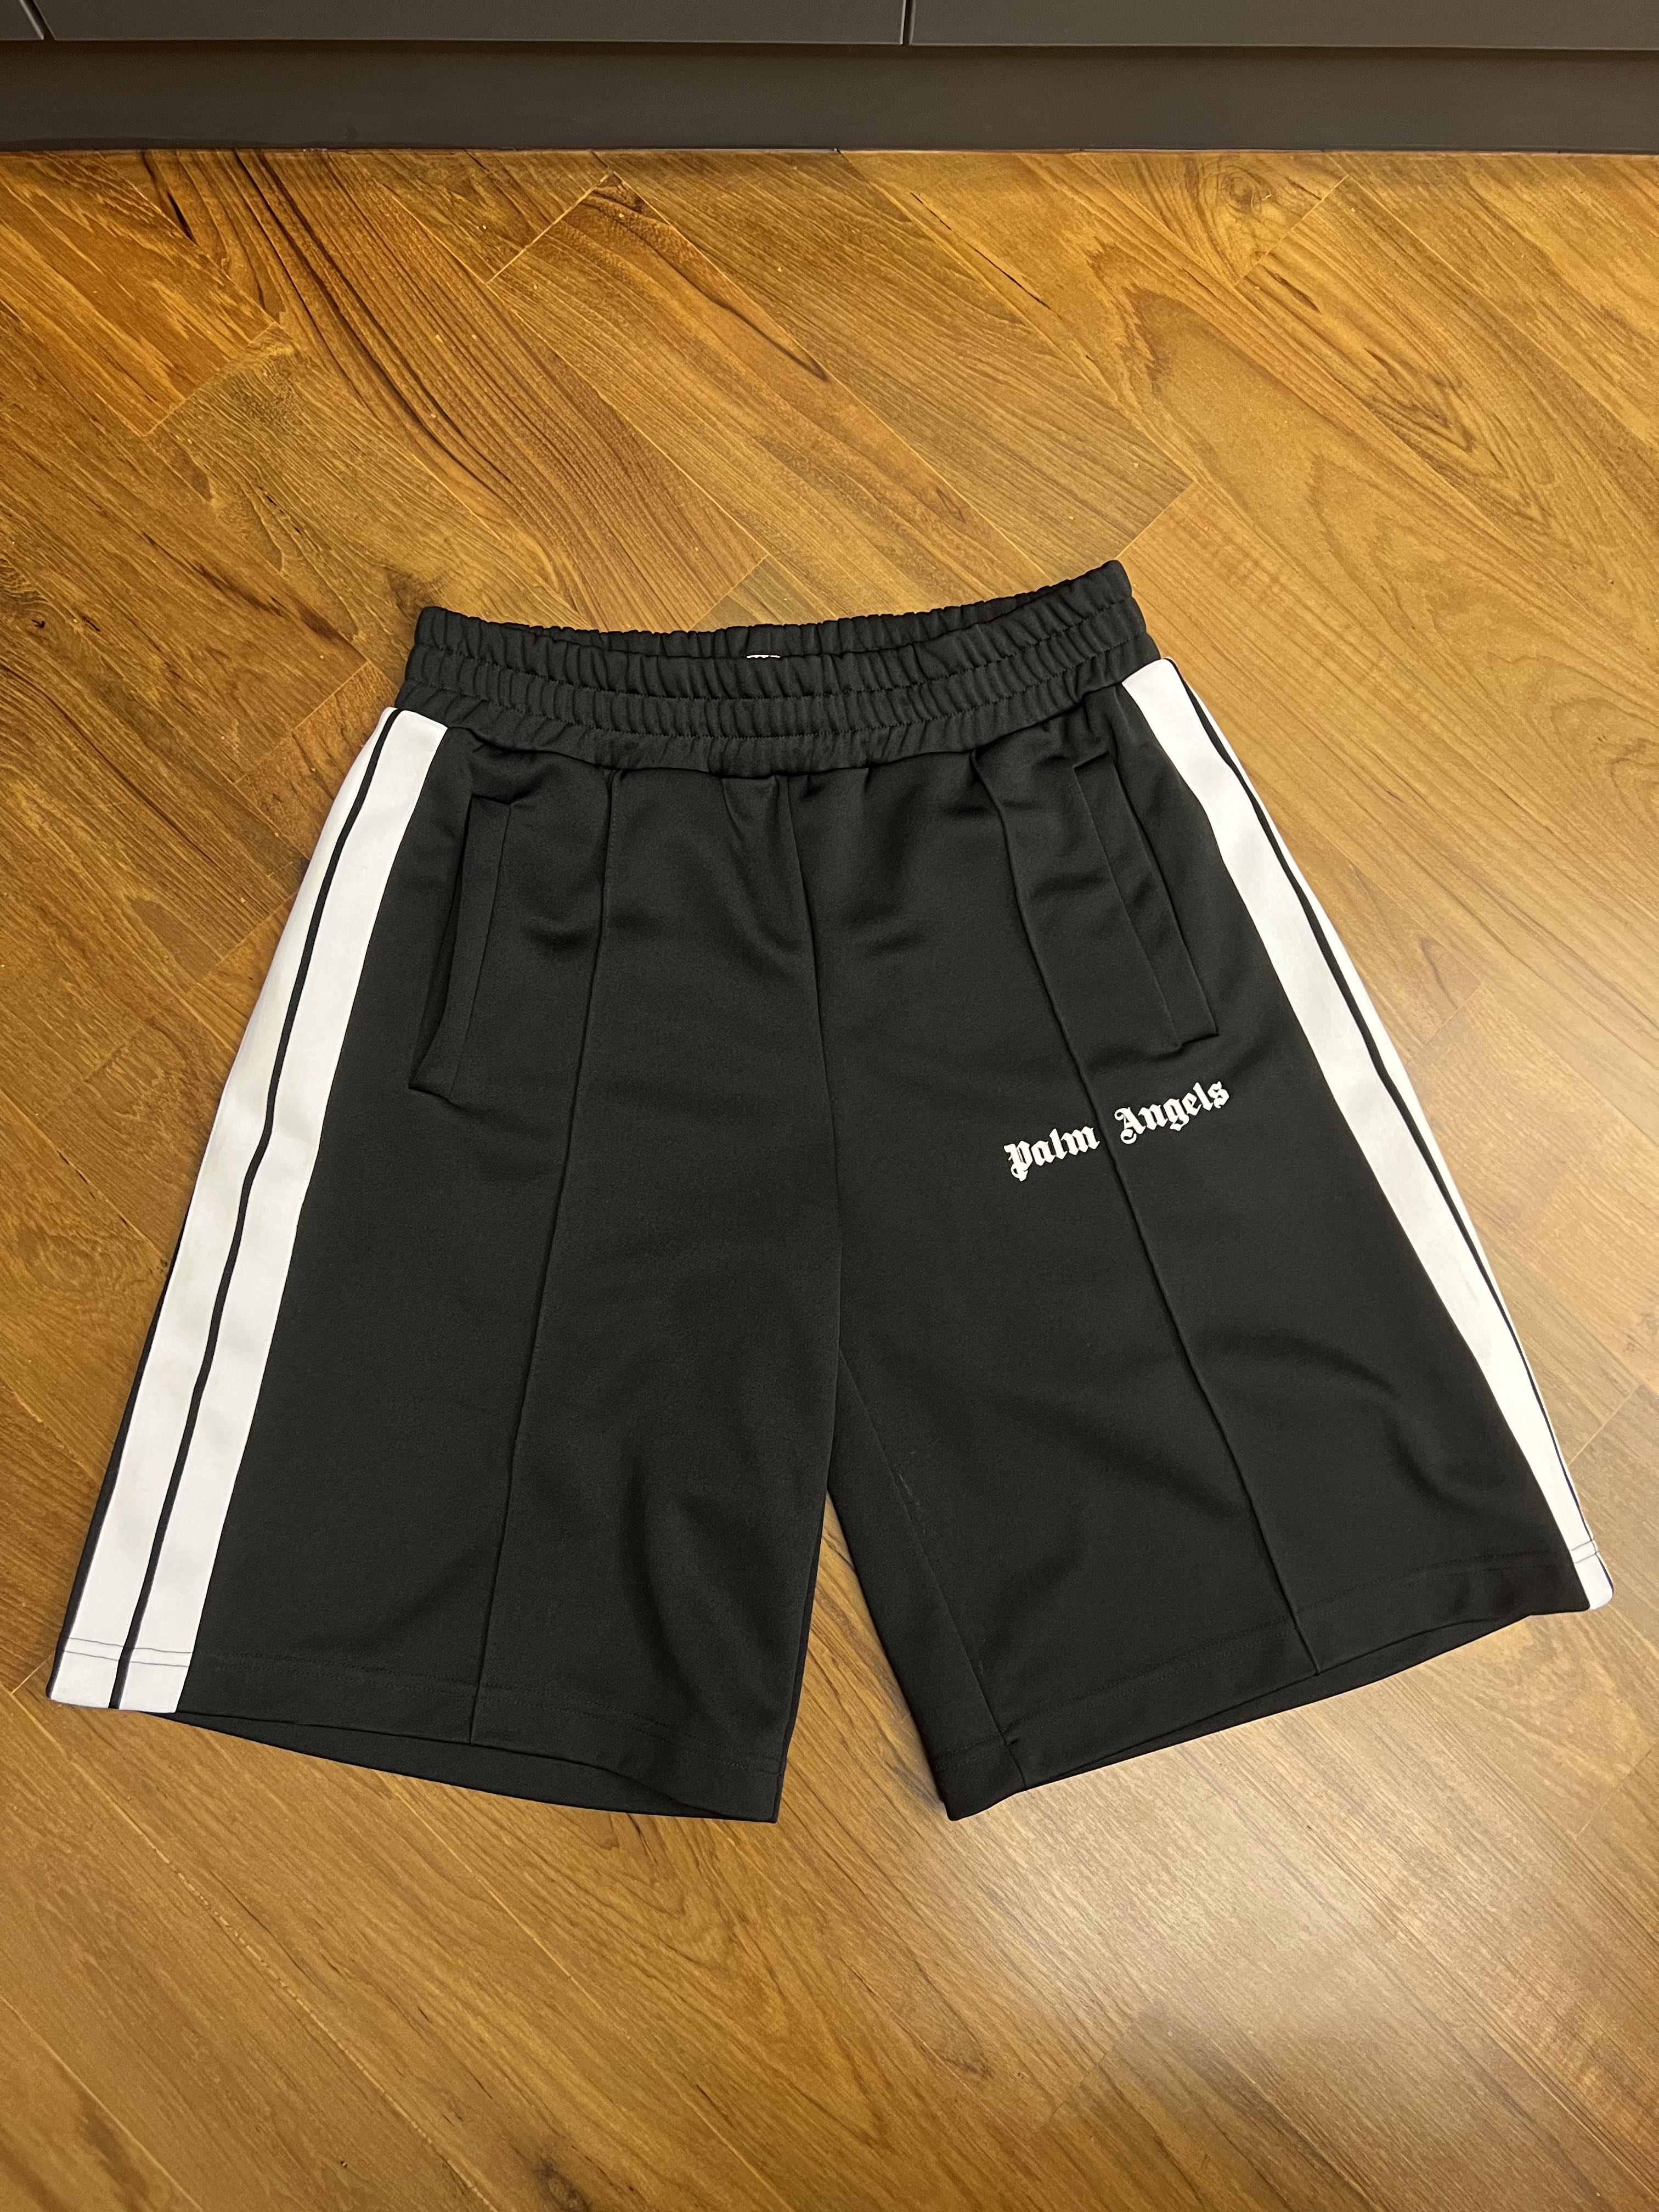 Palm Angels Black Track Shorts, Men's Fashion, Bottoms, Shorts on Carousell